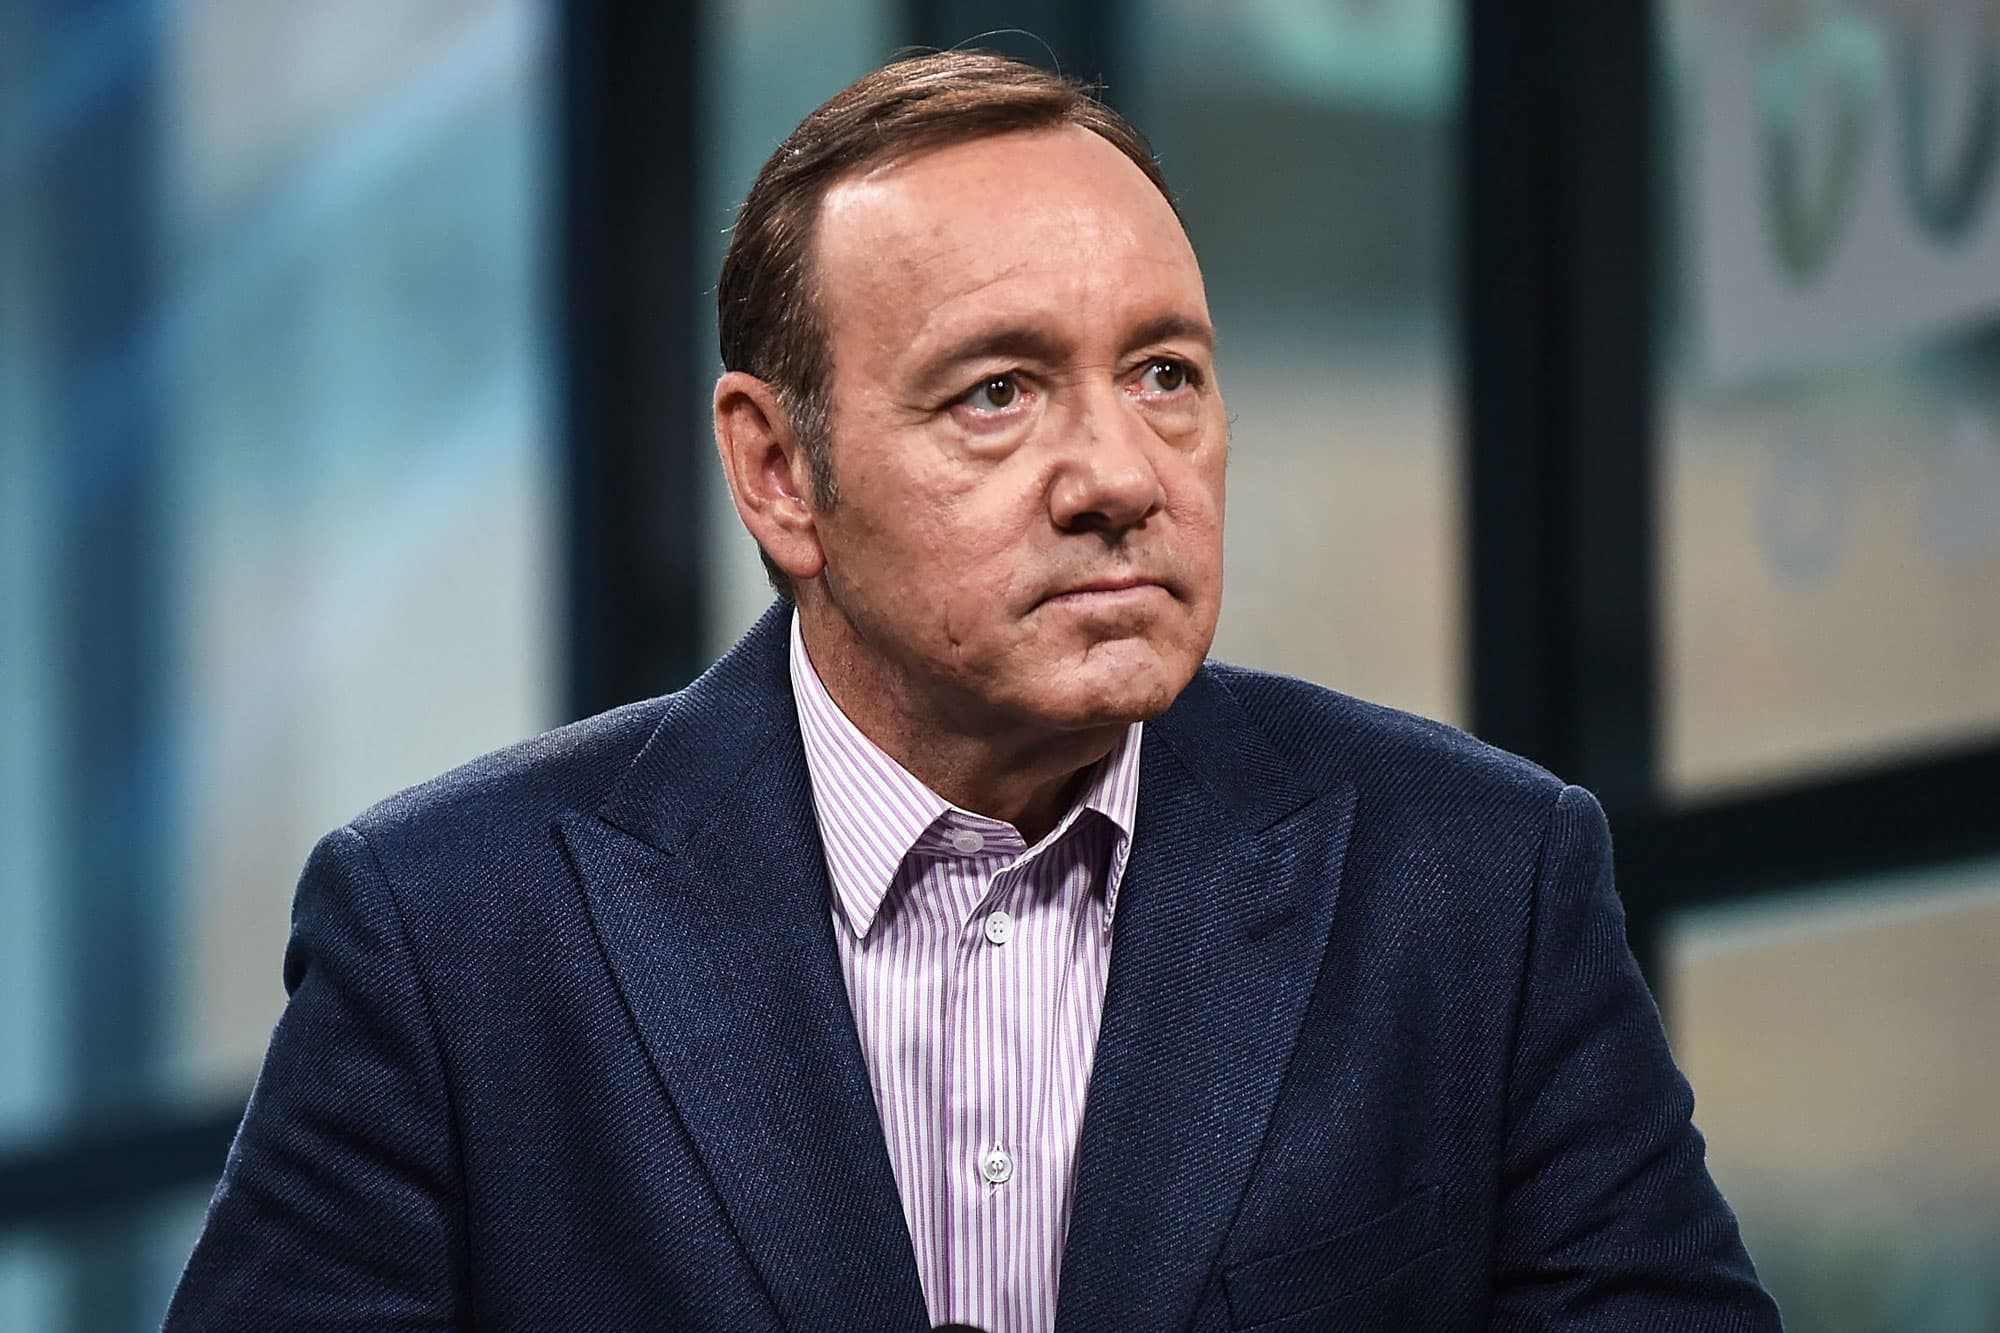 Actor Kevin Spacey charged with sexual assault against three men